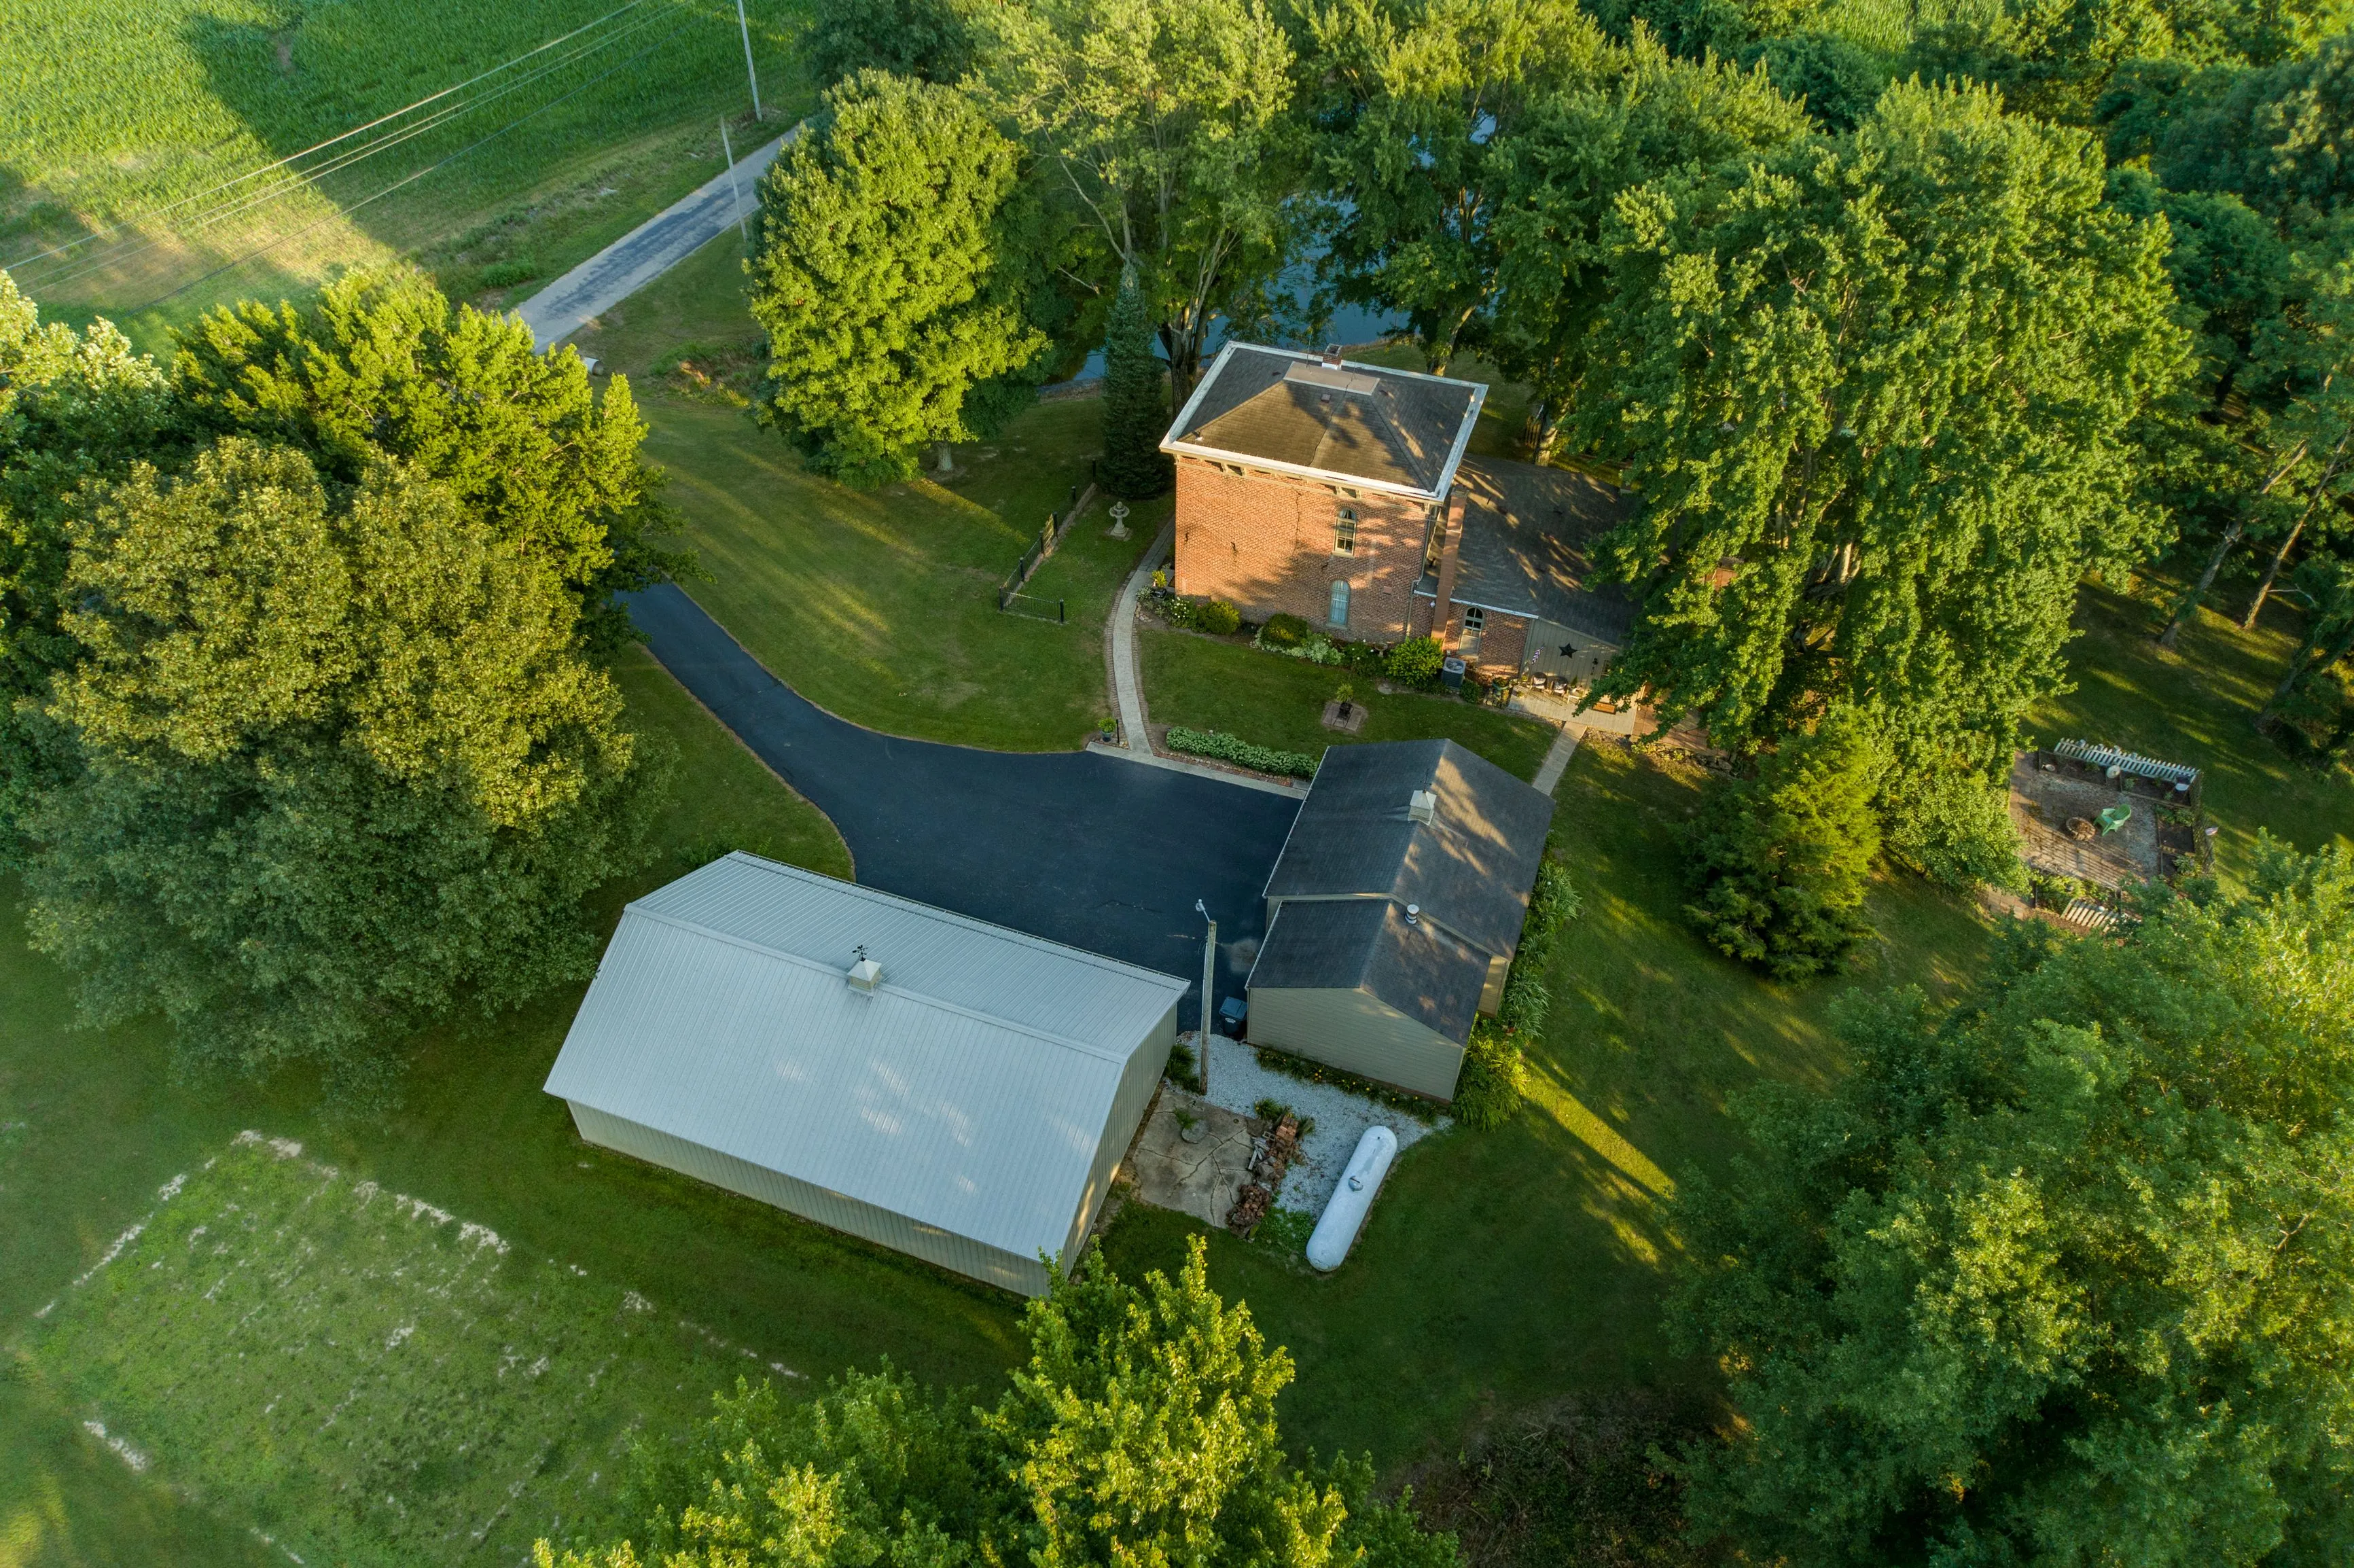 Aerial view of a residential property with a brick house, large metal outbuilding, and surrounding green trees.